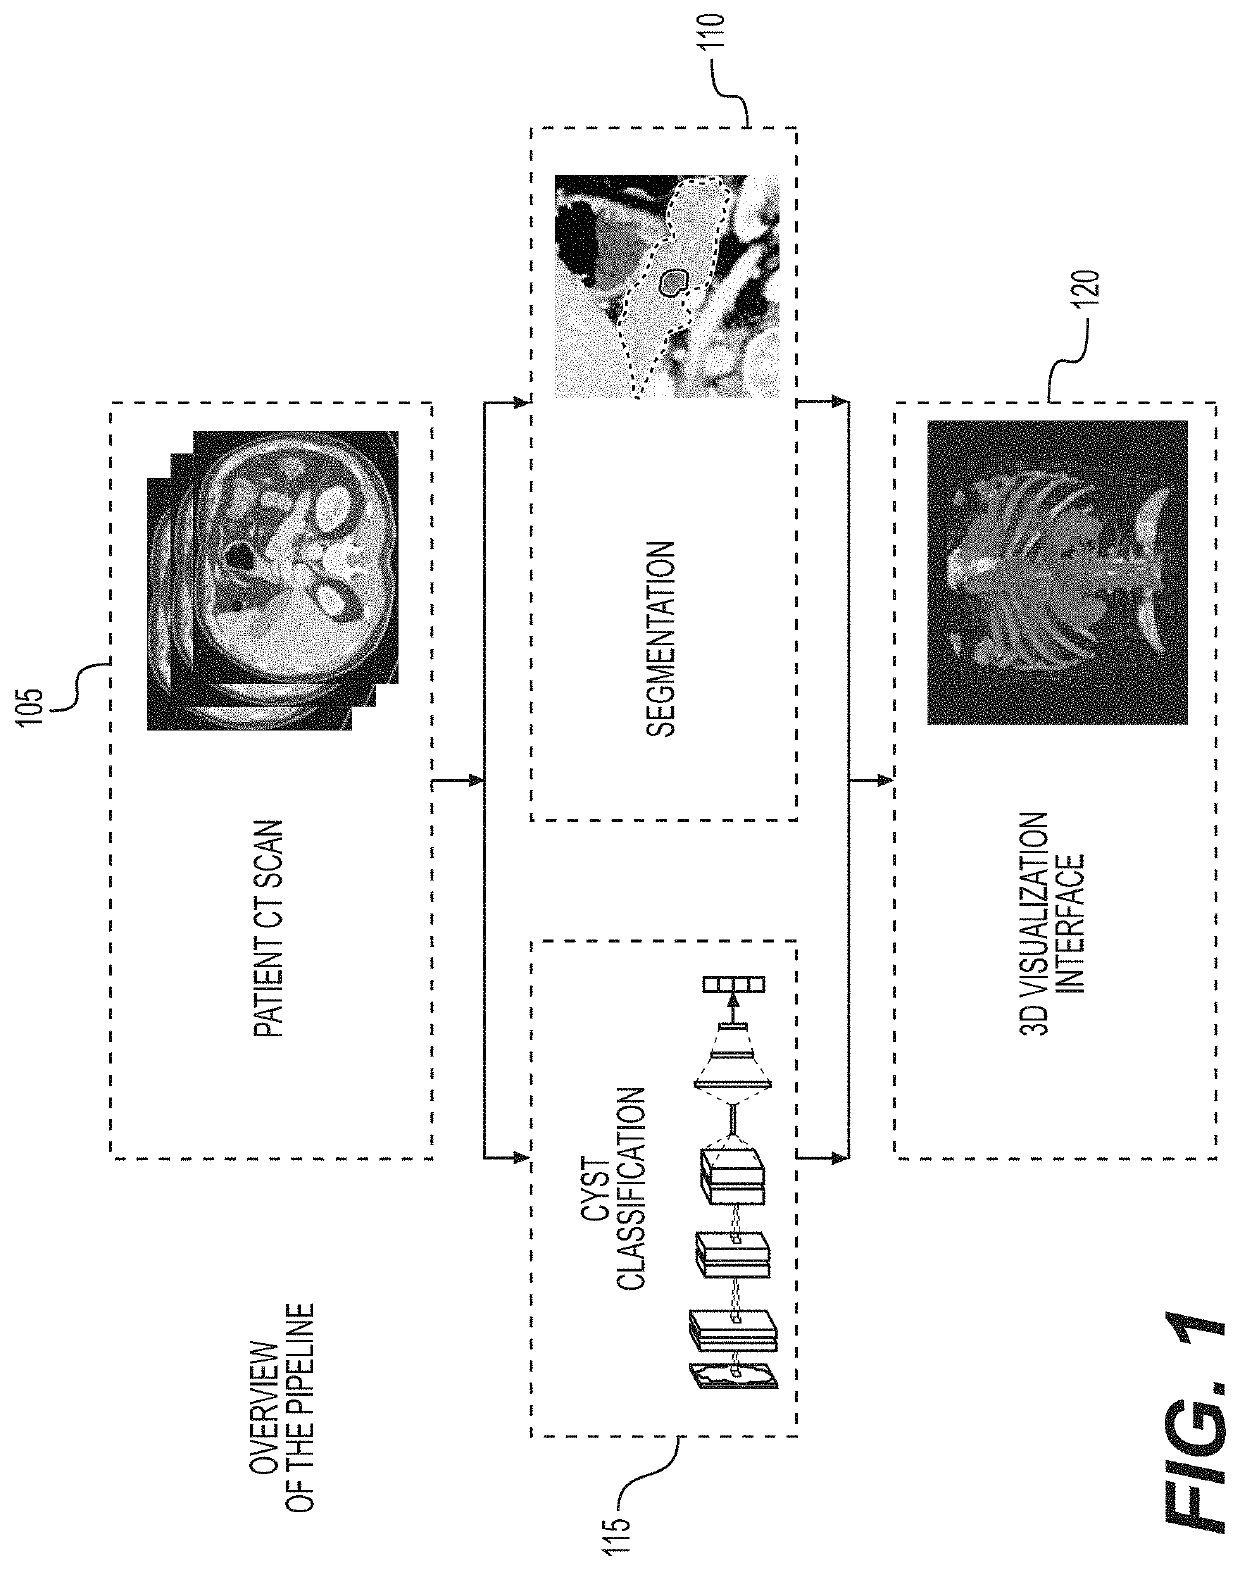 System, method, and computer-accessible medium for virtual pancreatography